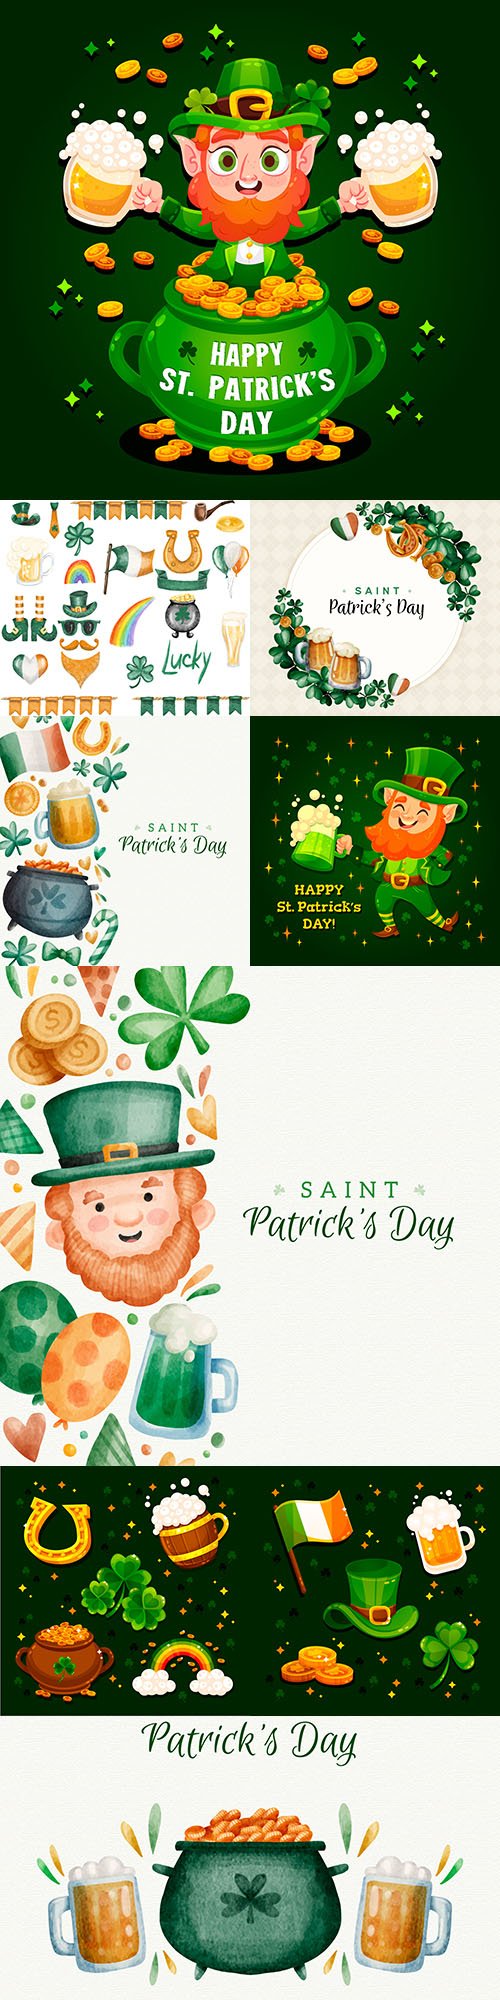 St. Patrick's Day party design vector illustrations 4